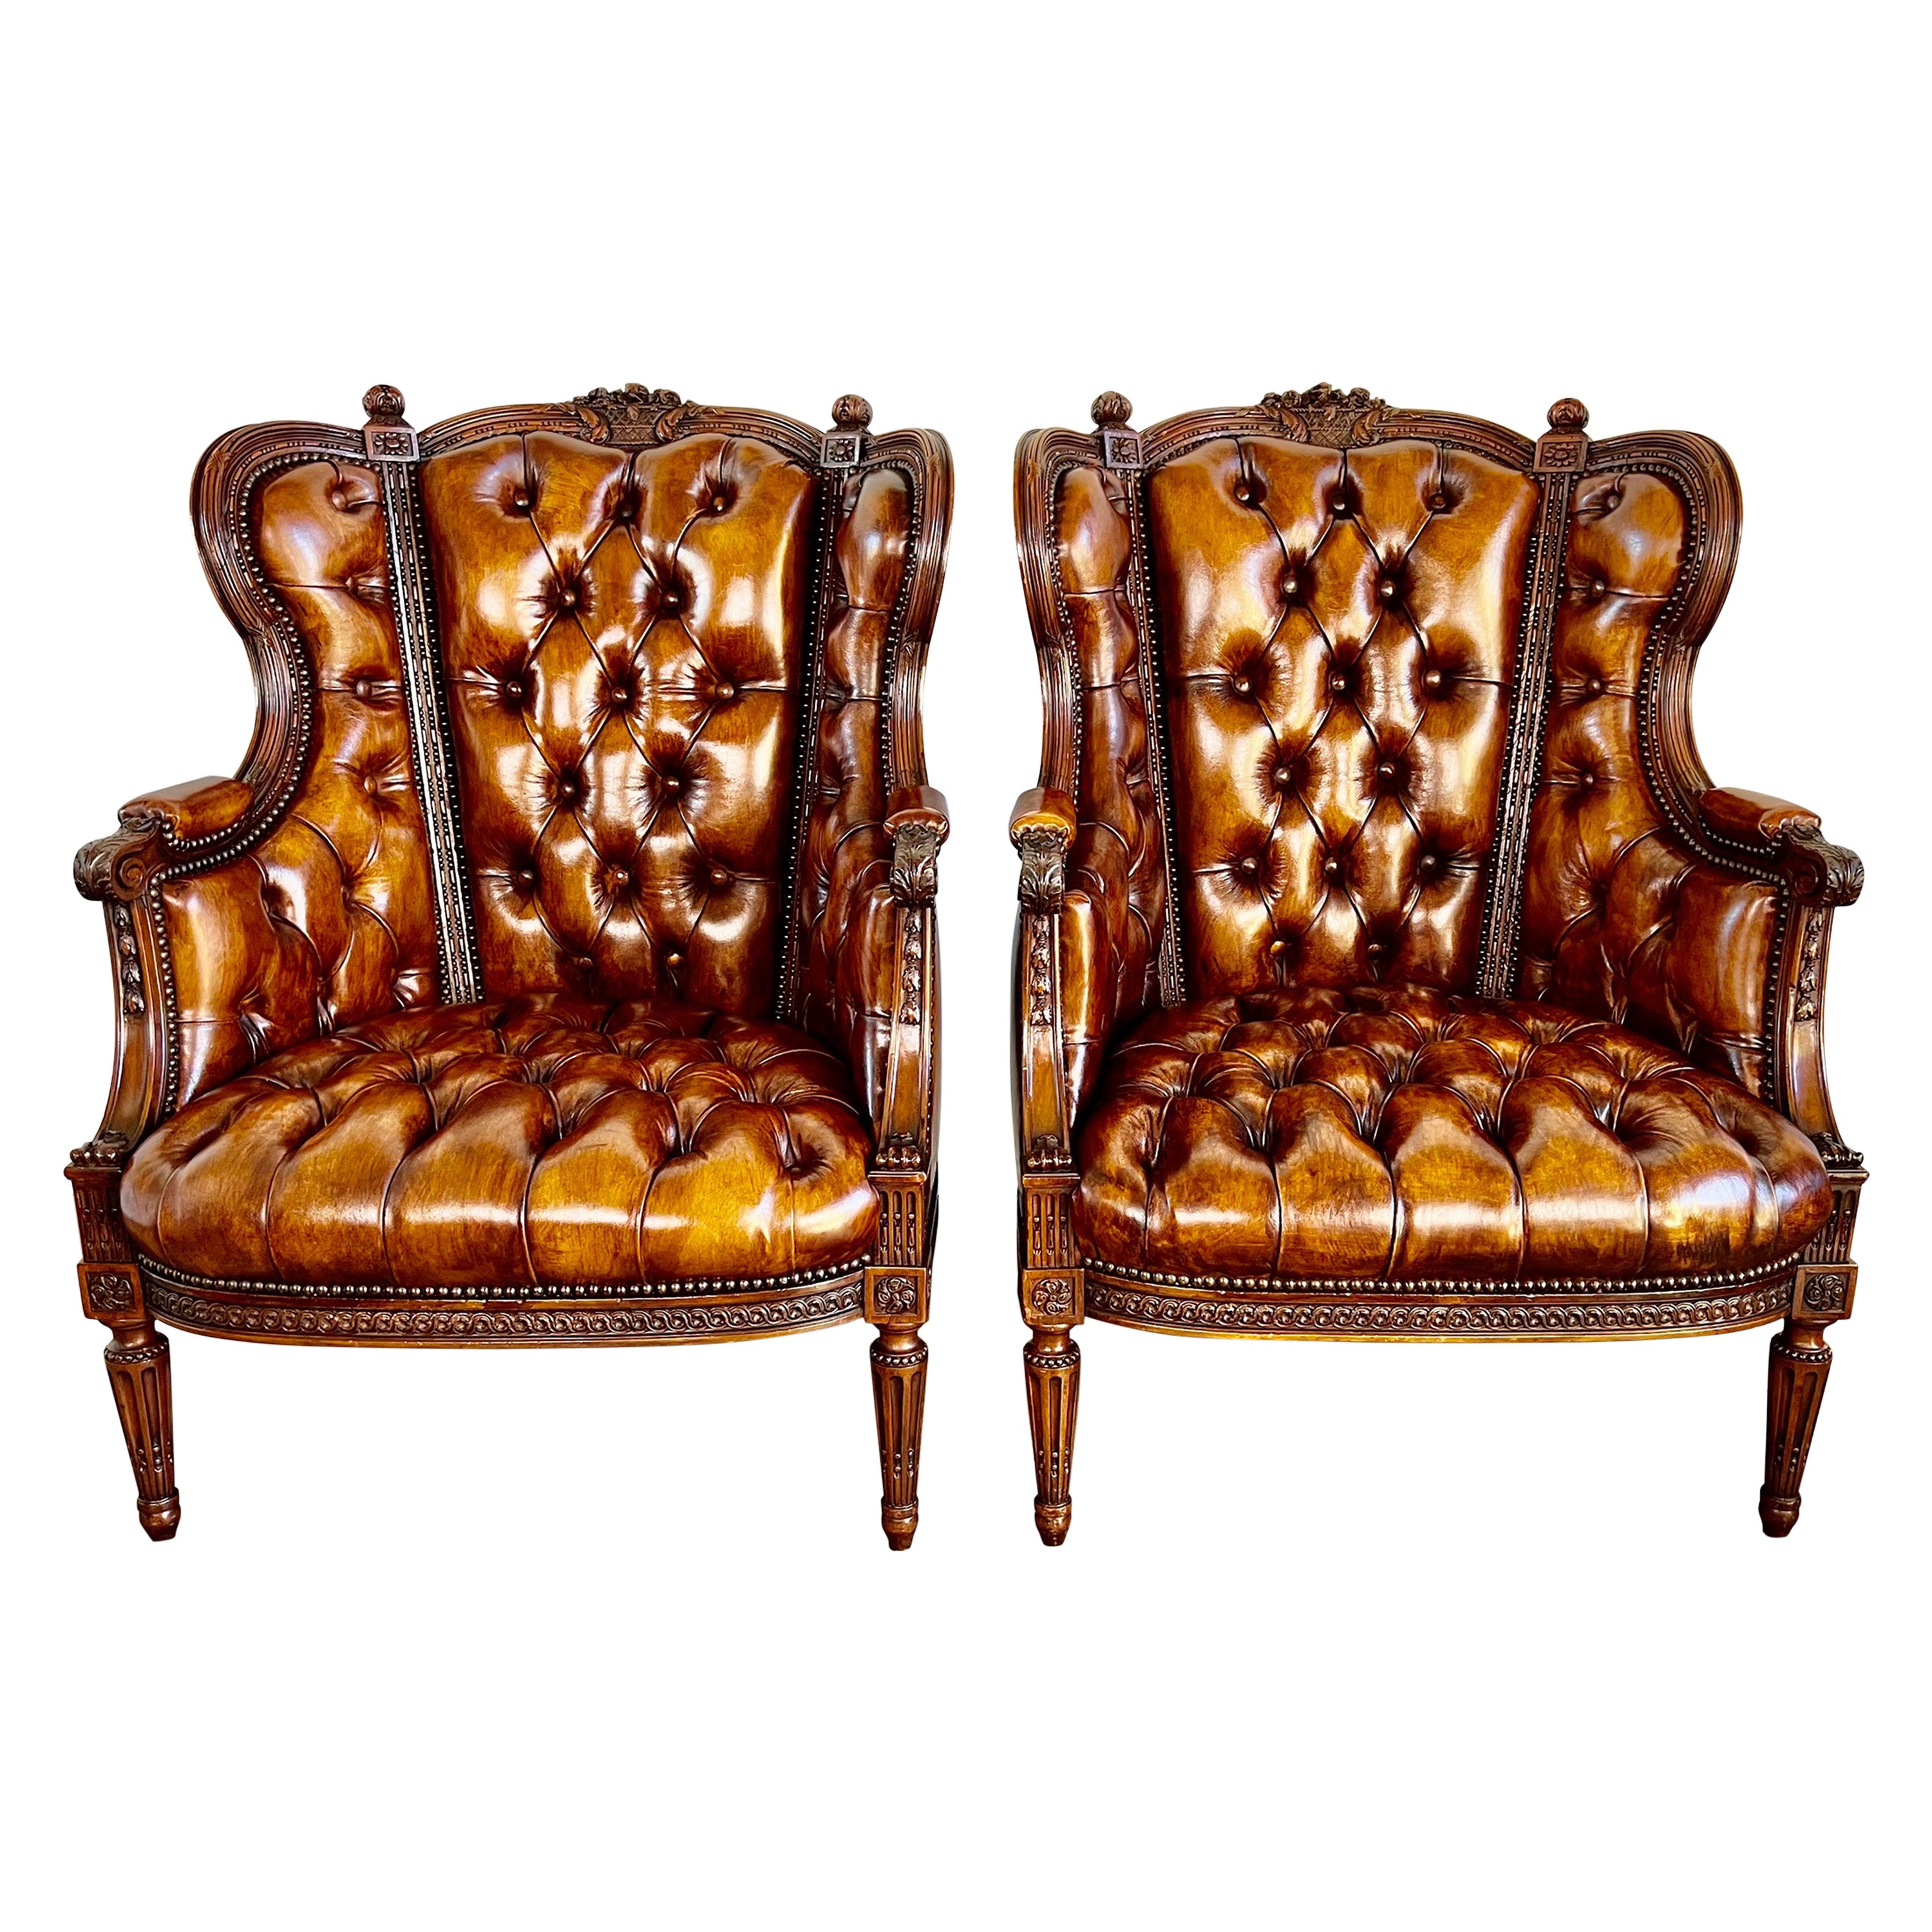 Pair of Leather Tufted Louis XVI Style Armchairs C. 1900's